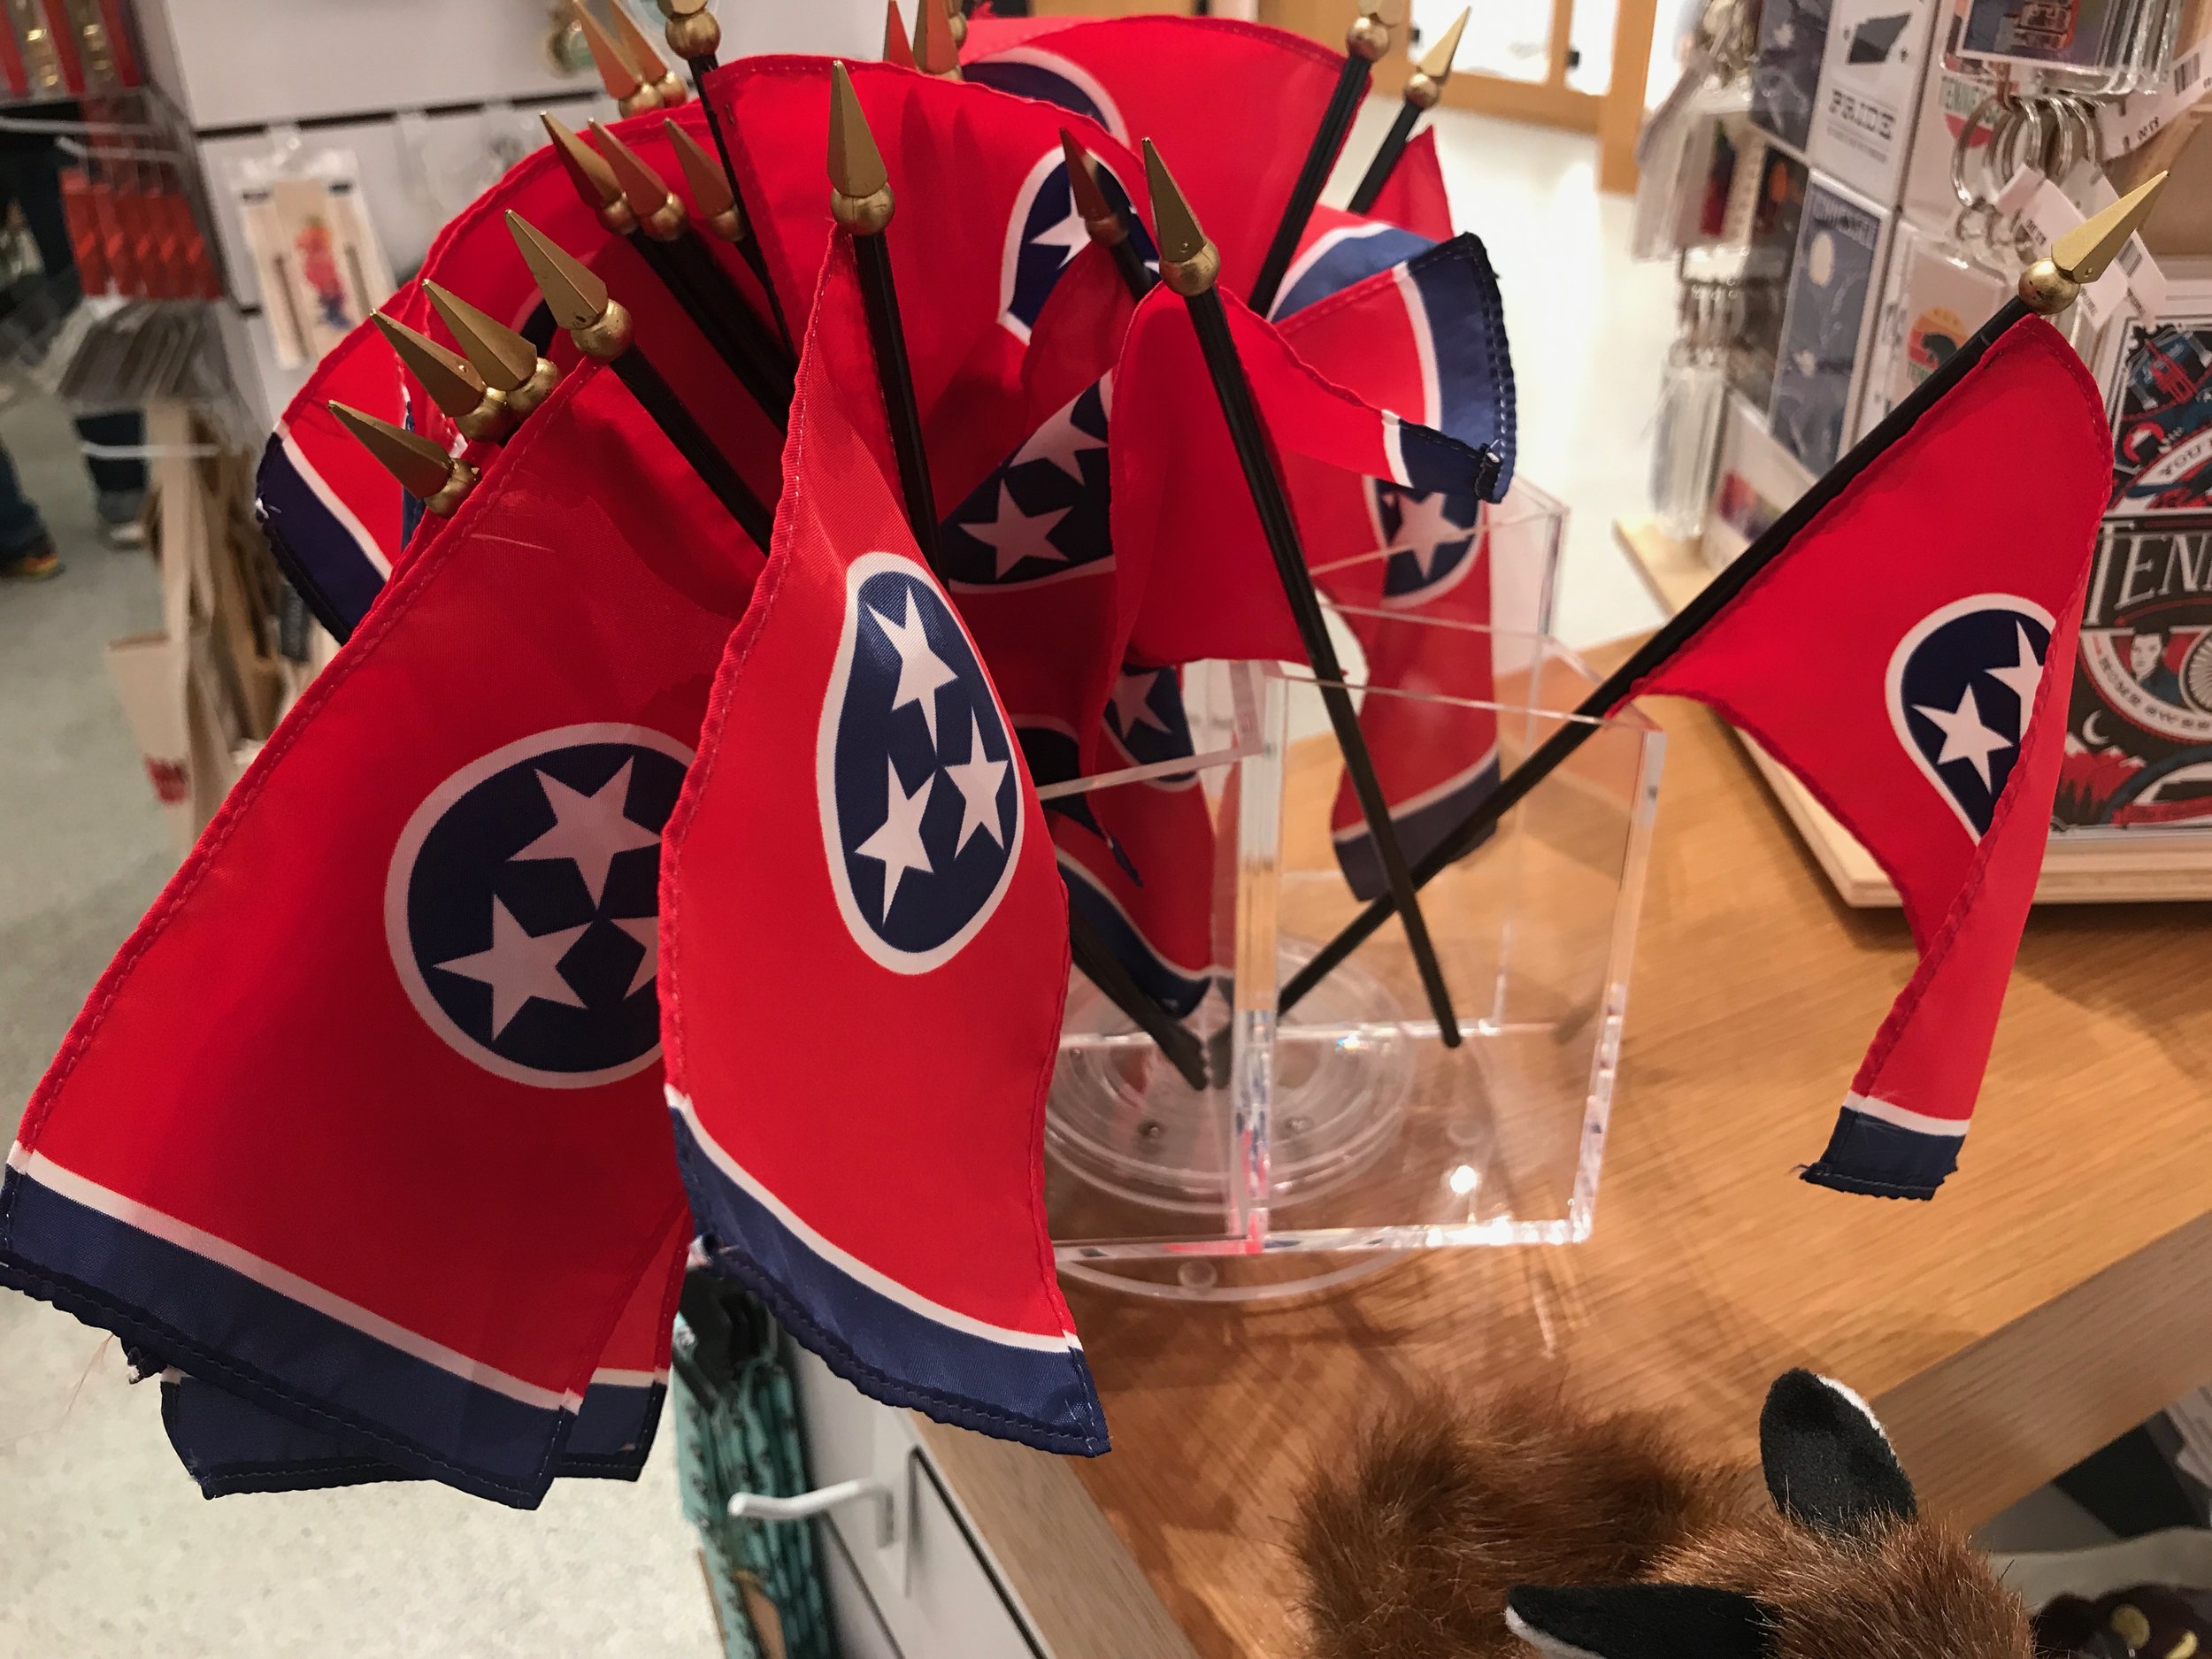  State flags for sale at the Tennessee State Museum in Nashville.      